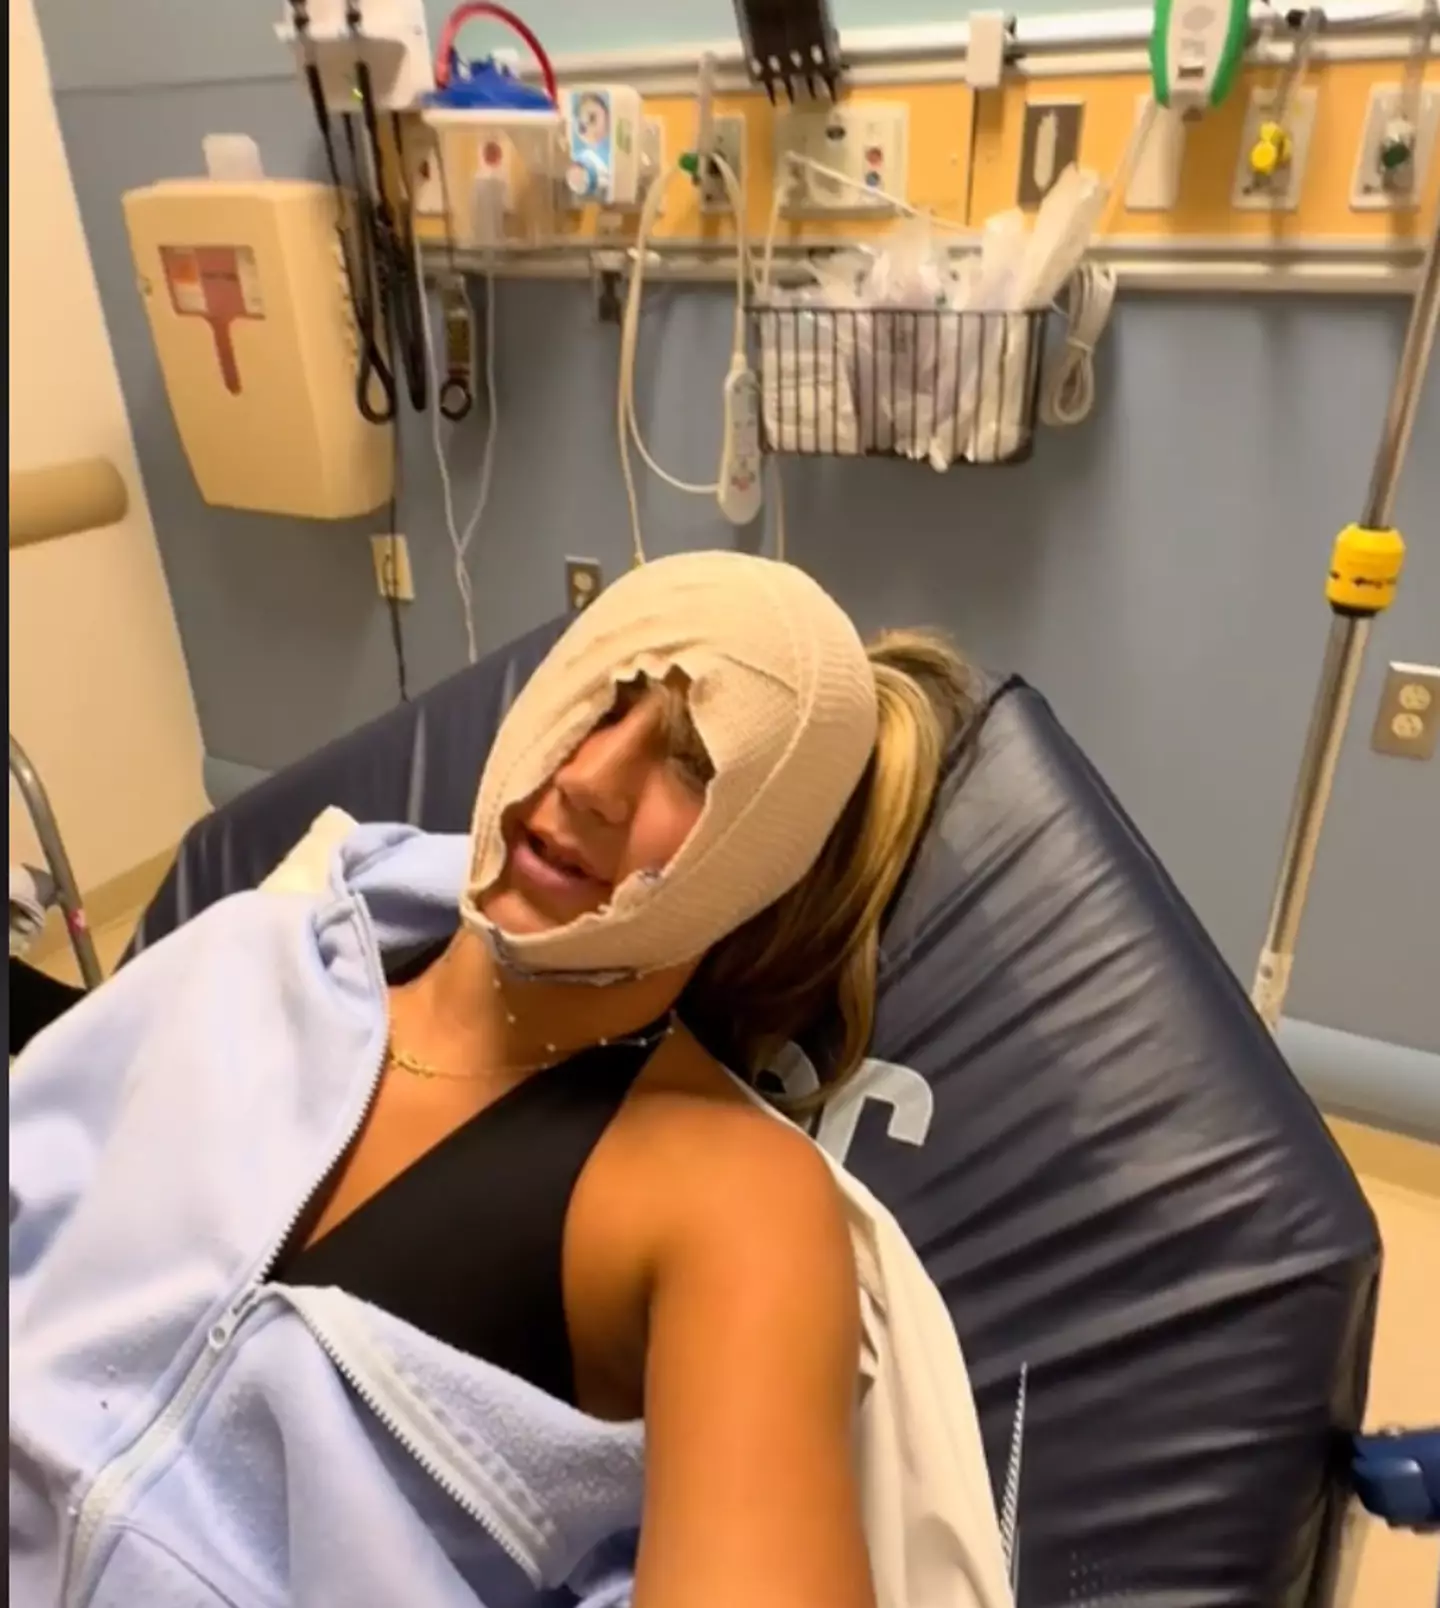 Posting on her TikTok page earlier this week she let her fans follow her journey from locking her jaw to heading to the hospital. (Jennasinatra)